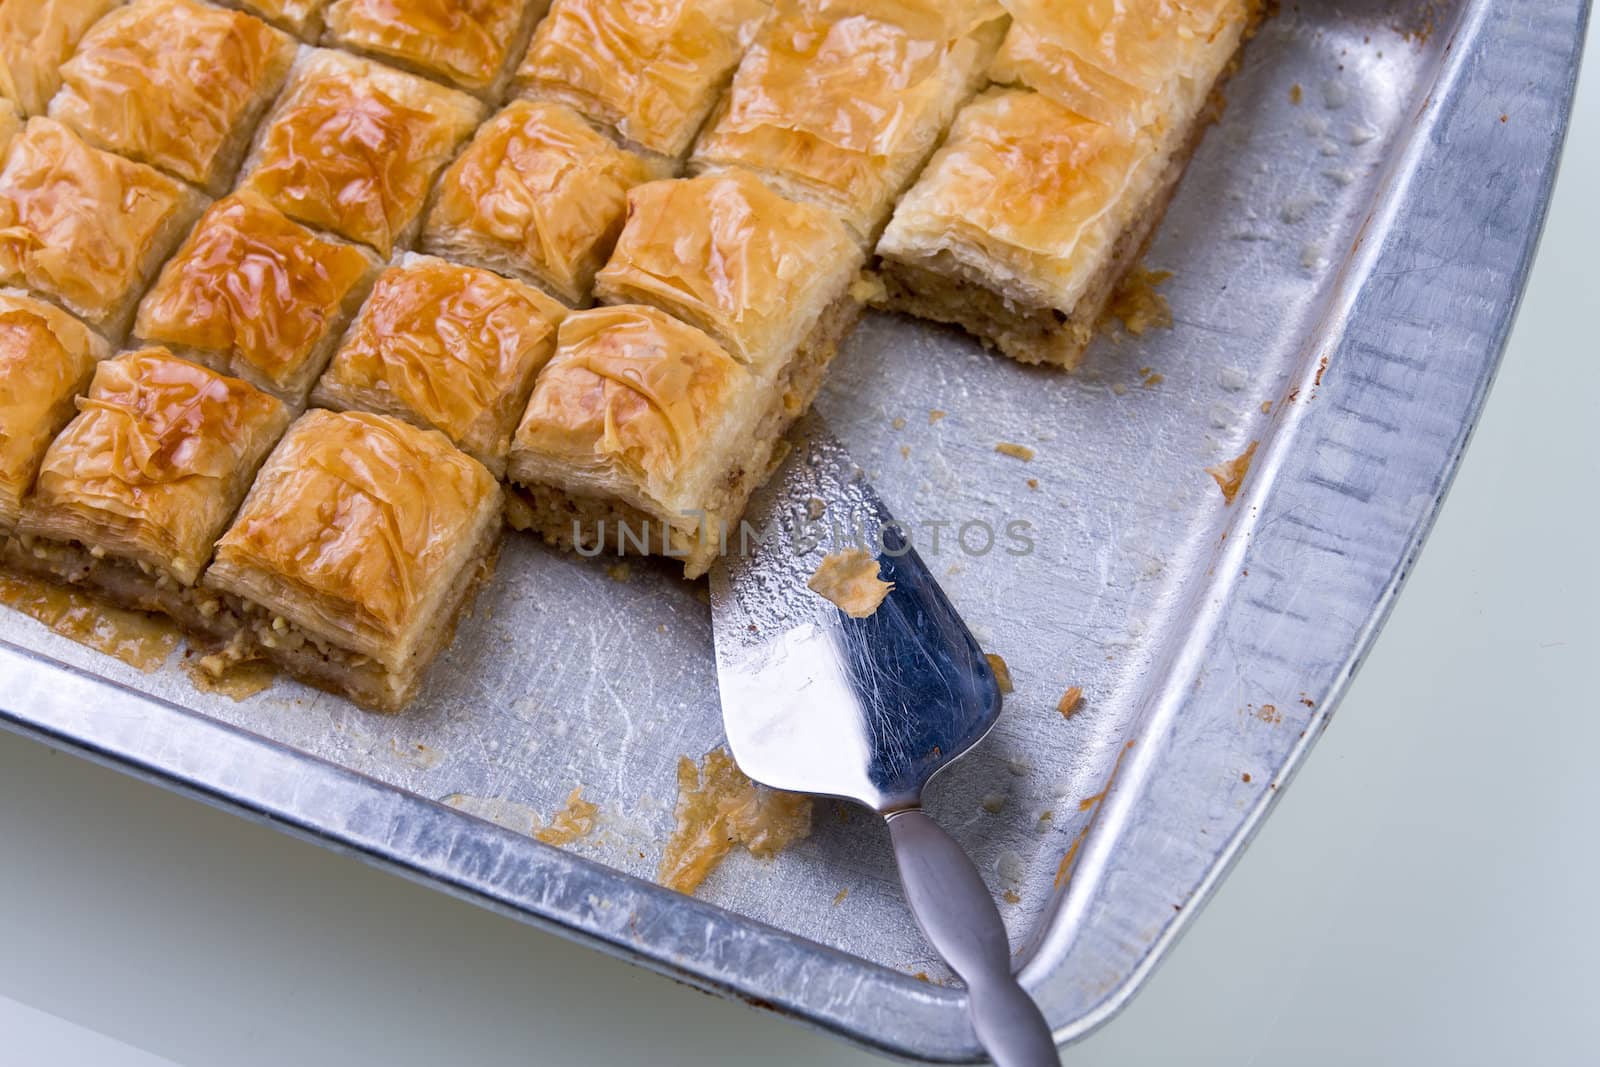 Home made baklava ready to serv from aluminum tray with brushed stailes-steel spatula